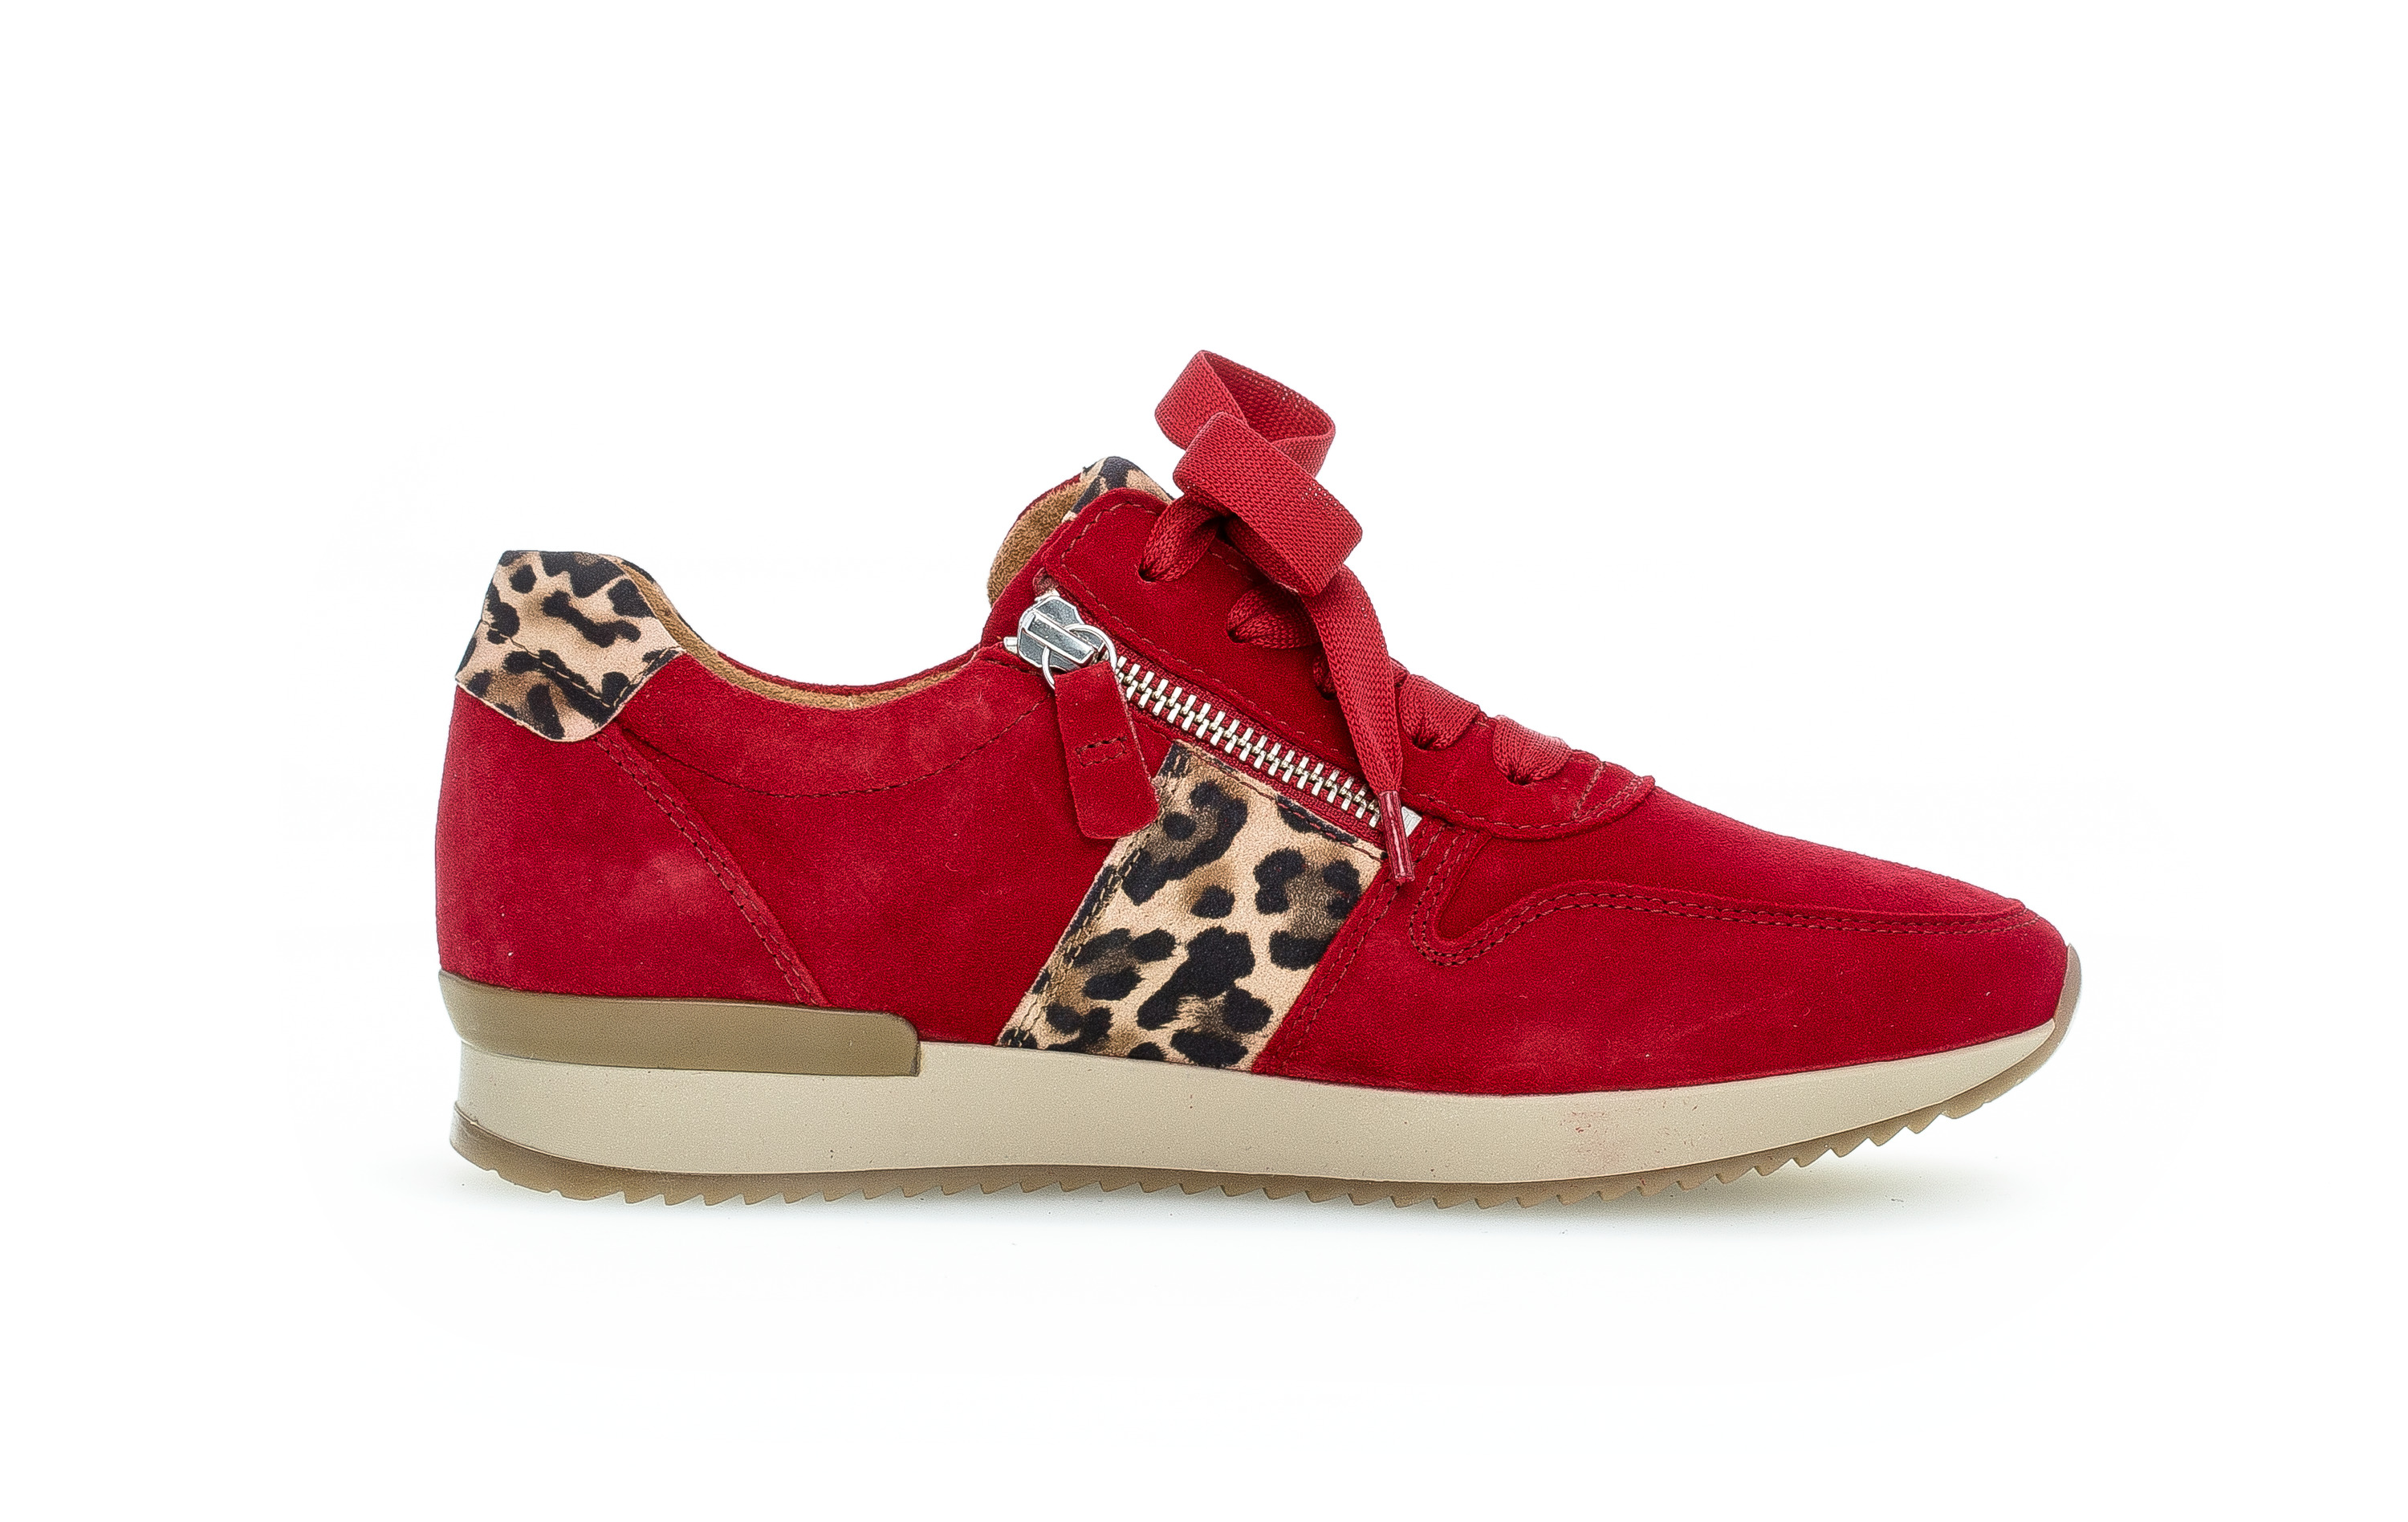 Sneaker Red suede leather